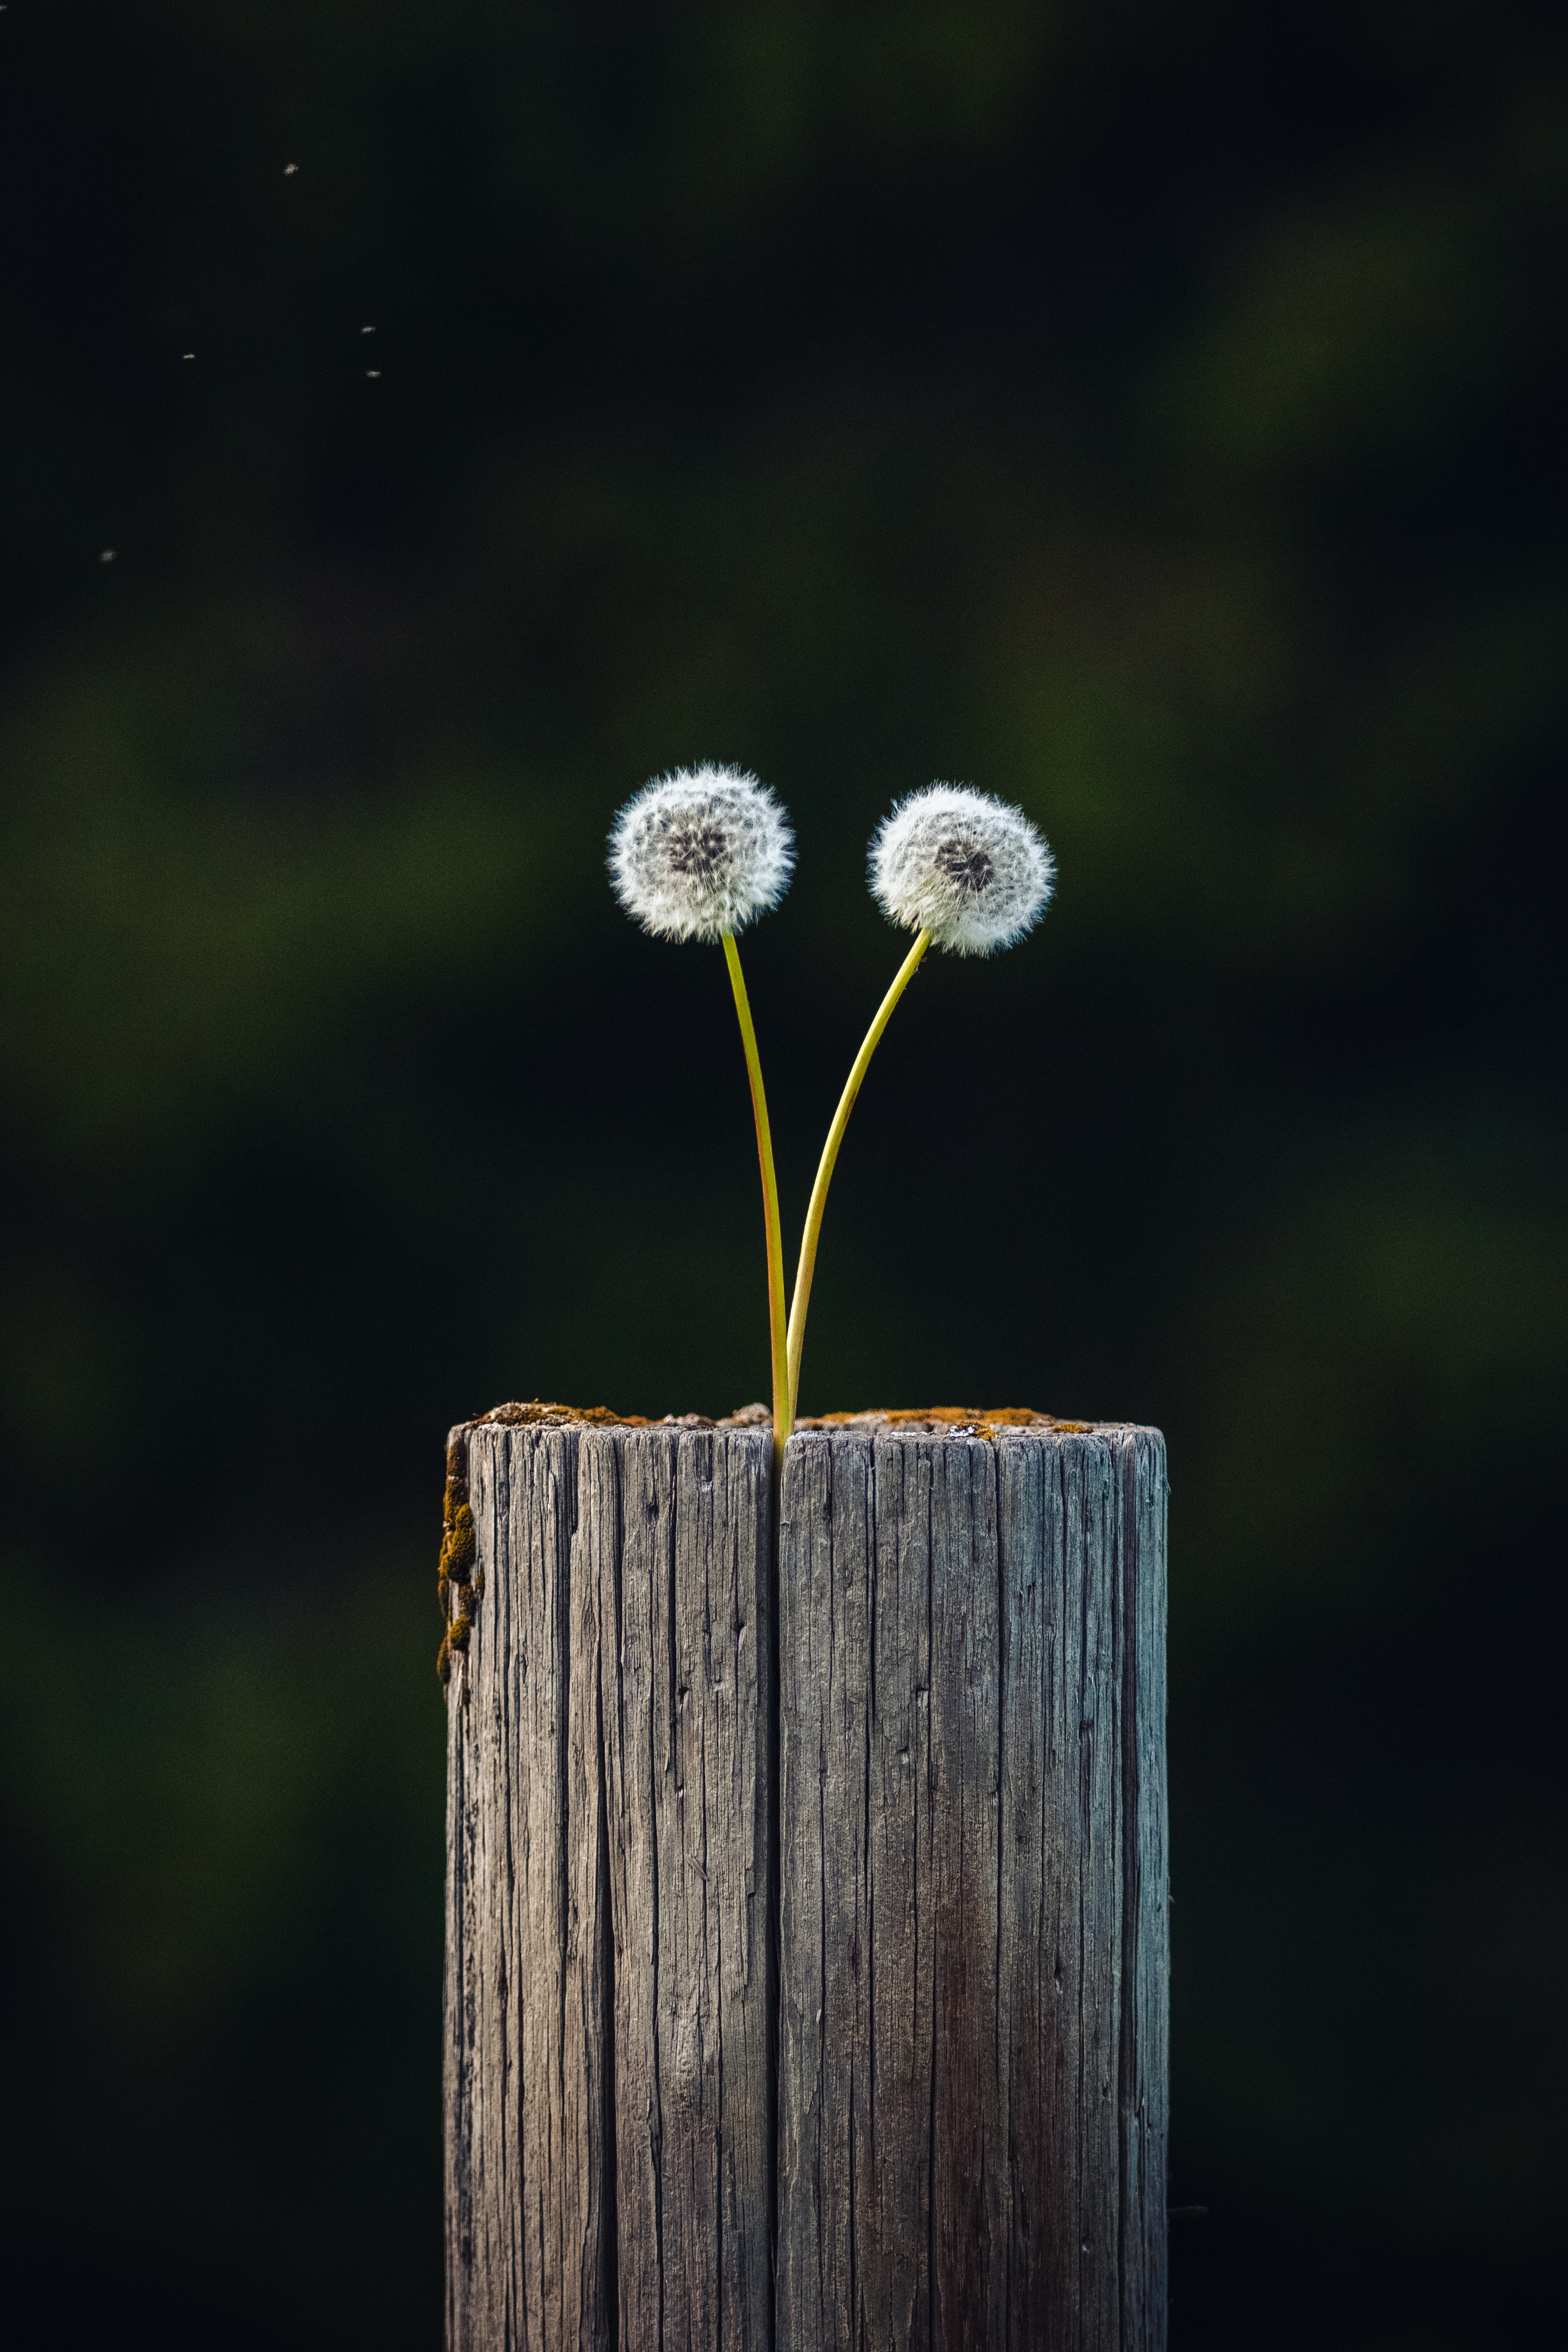 android wood, focus, nature, dandelions, plant, wooden, log